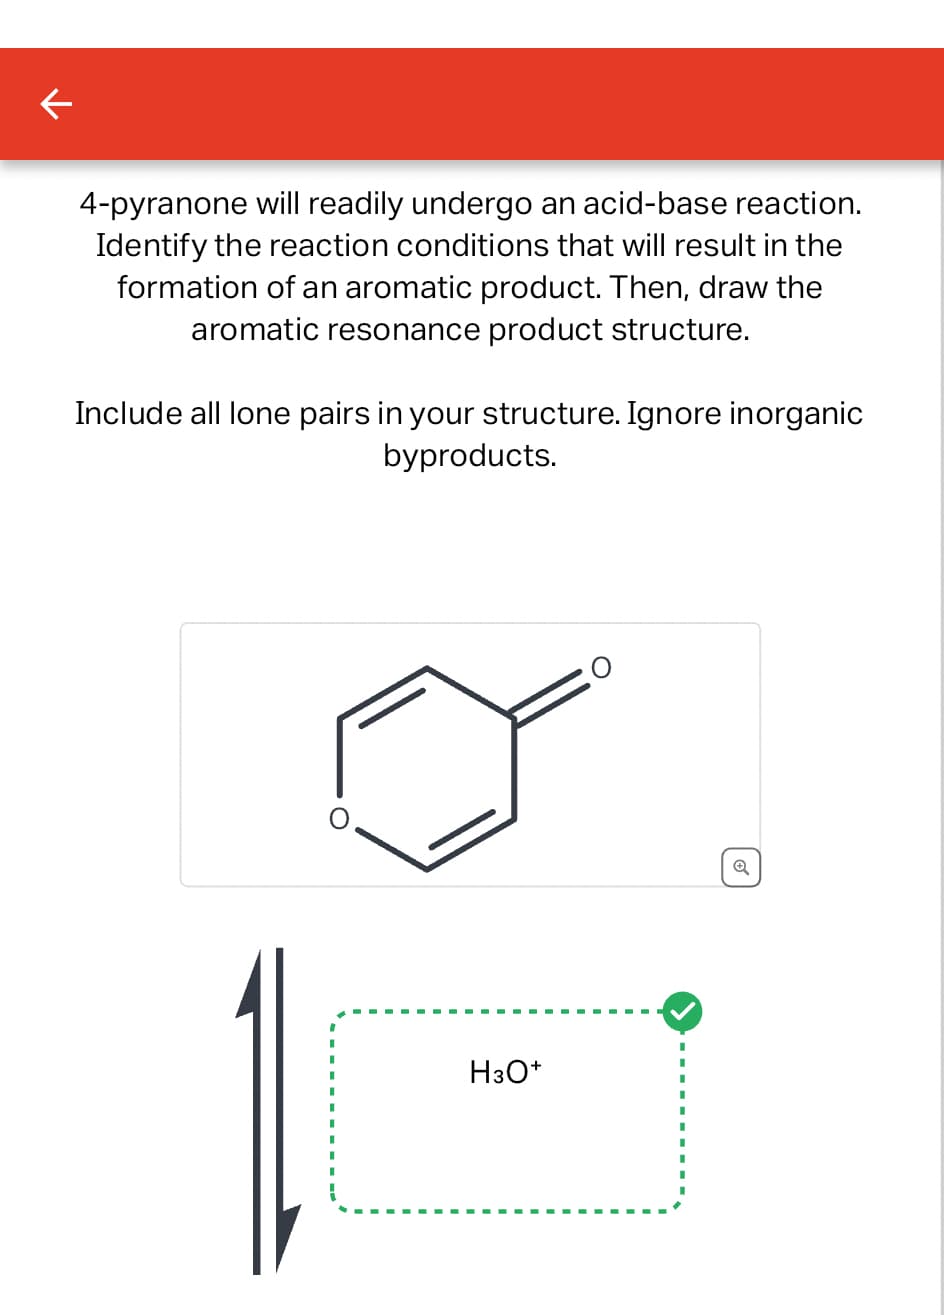 4-pyranone will readily undergo an acid-base reaction.
Identify the reaction conditions that will result in the
formation of an aromatic product. Then, draw the
aromatic resonance product structure.
Include all lone pairs in your structure. Ignore inorganic
byproducts.
H3O+